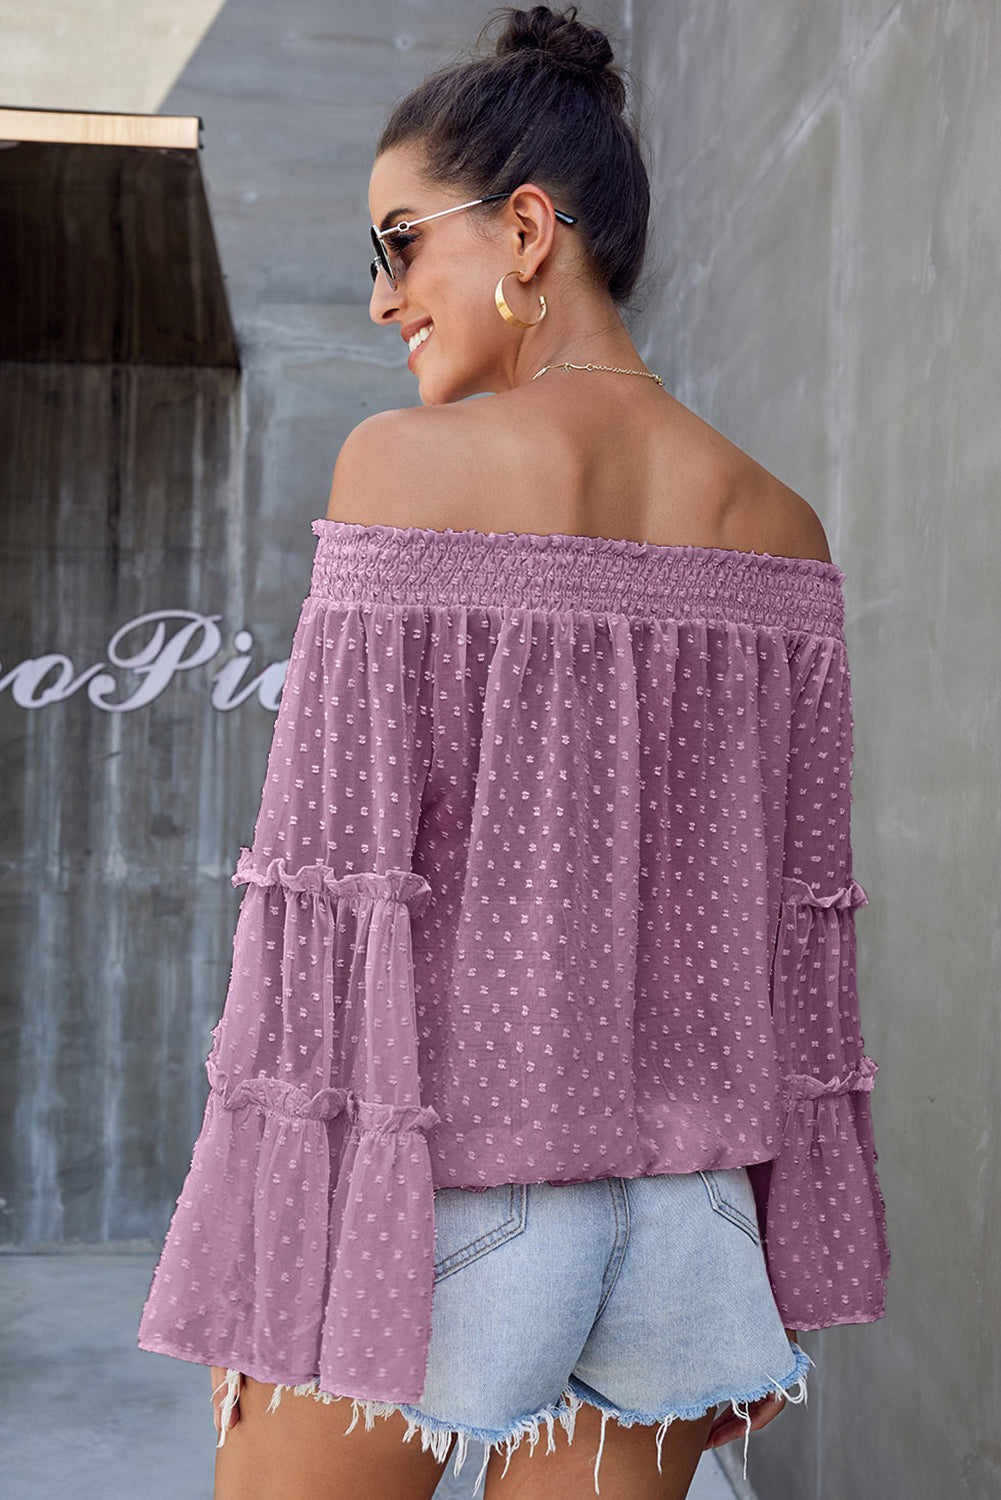 Blouse Chic a Pois Suisse Mauve Manches Flare Epaule Denudee